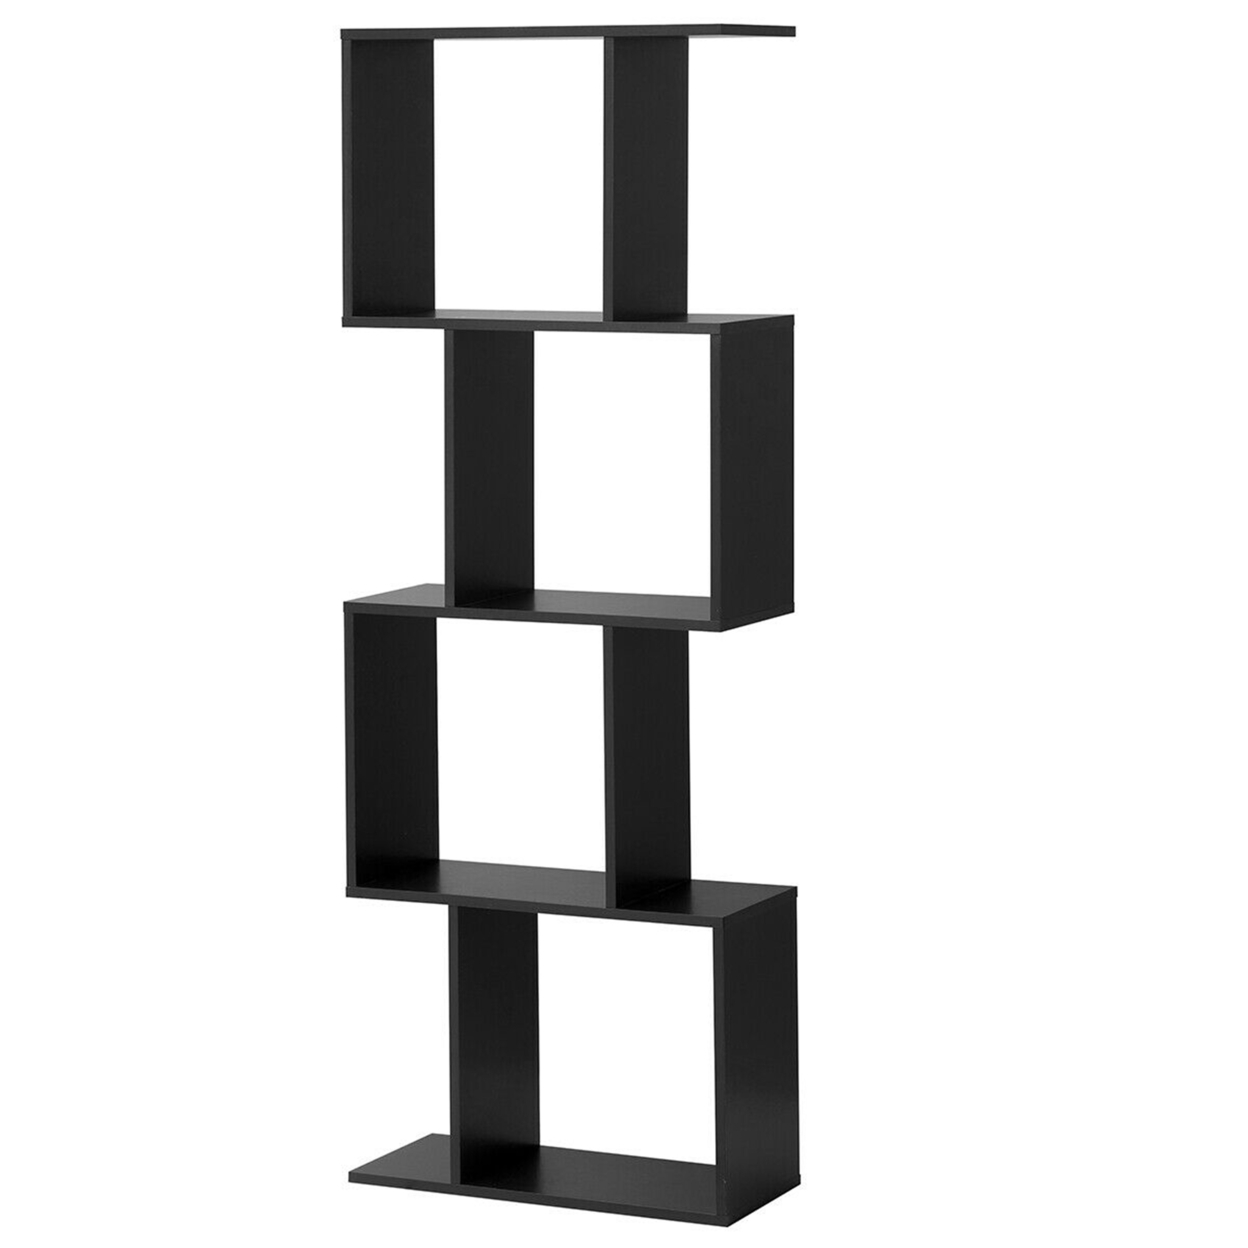 4-tier S-Shaped Bookcase Free Standing Storage Rack Wooden Display Decor Black